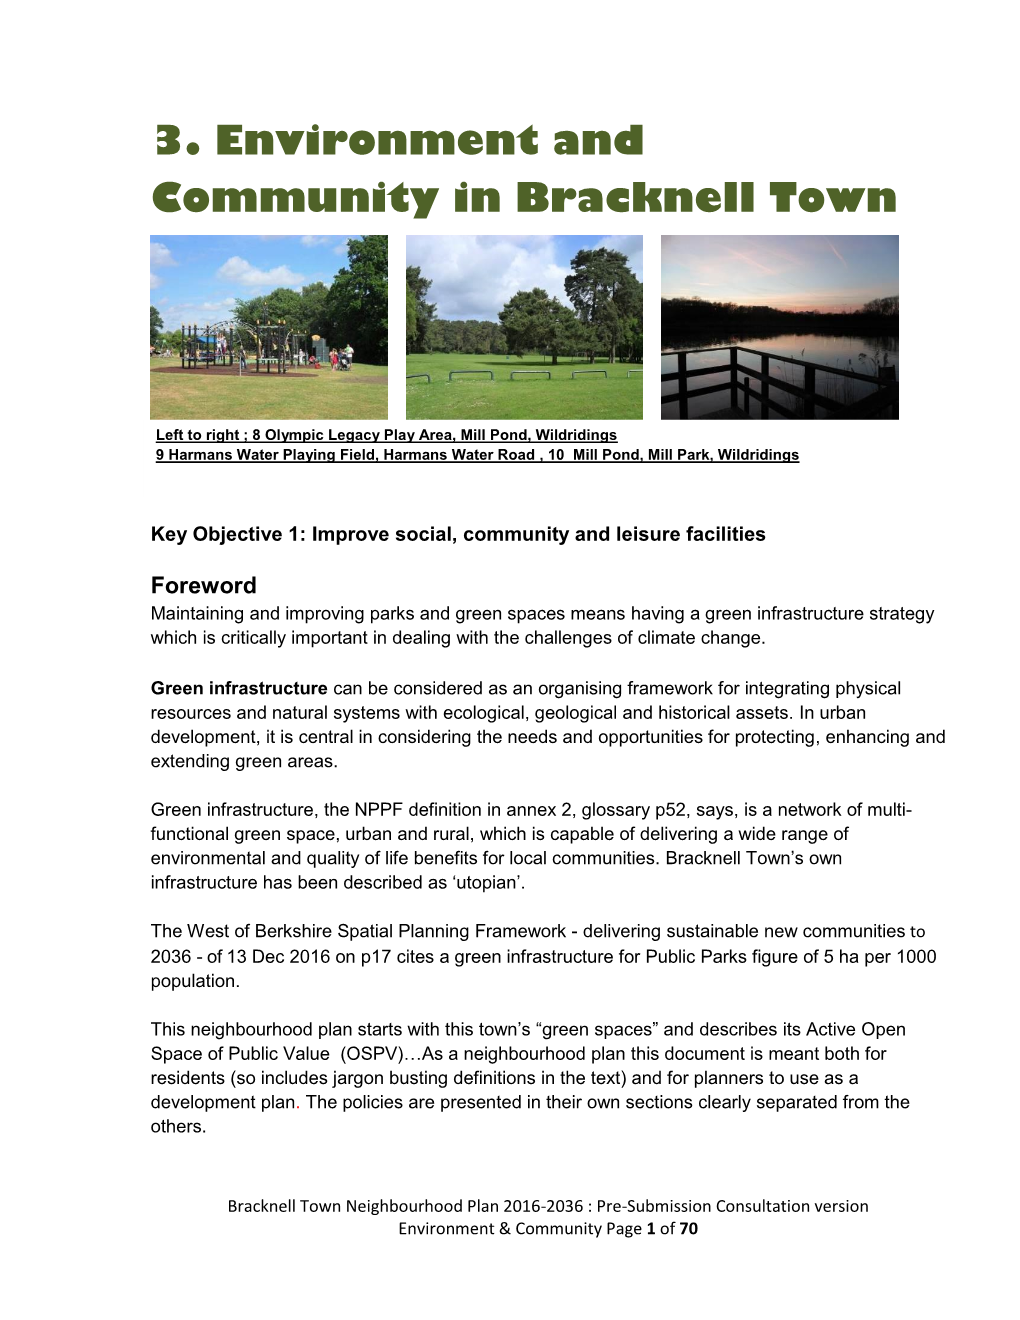 3. Environment and Community in Bracknell Town